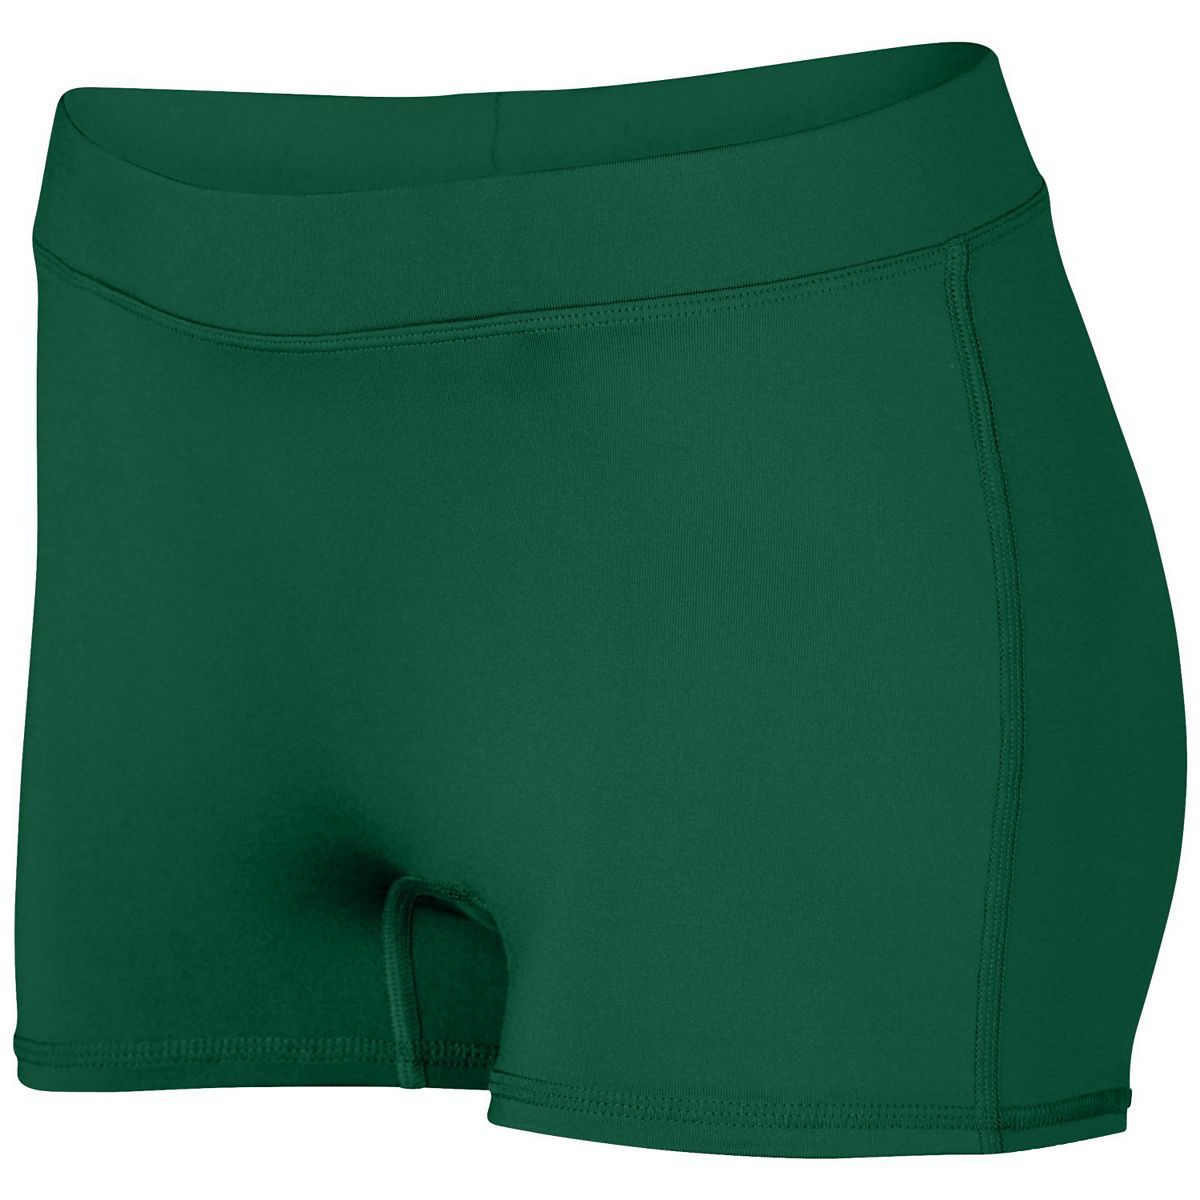 Augusta Sportswear Ladies Dare Shorts in Dark Green  -Part of the Ladies, Ladies-Shorts, Augusta-Products, Volleyball product lines at KanaleyCreations.com